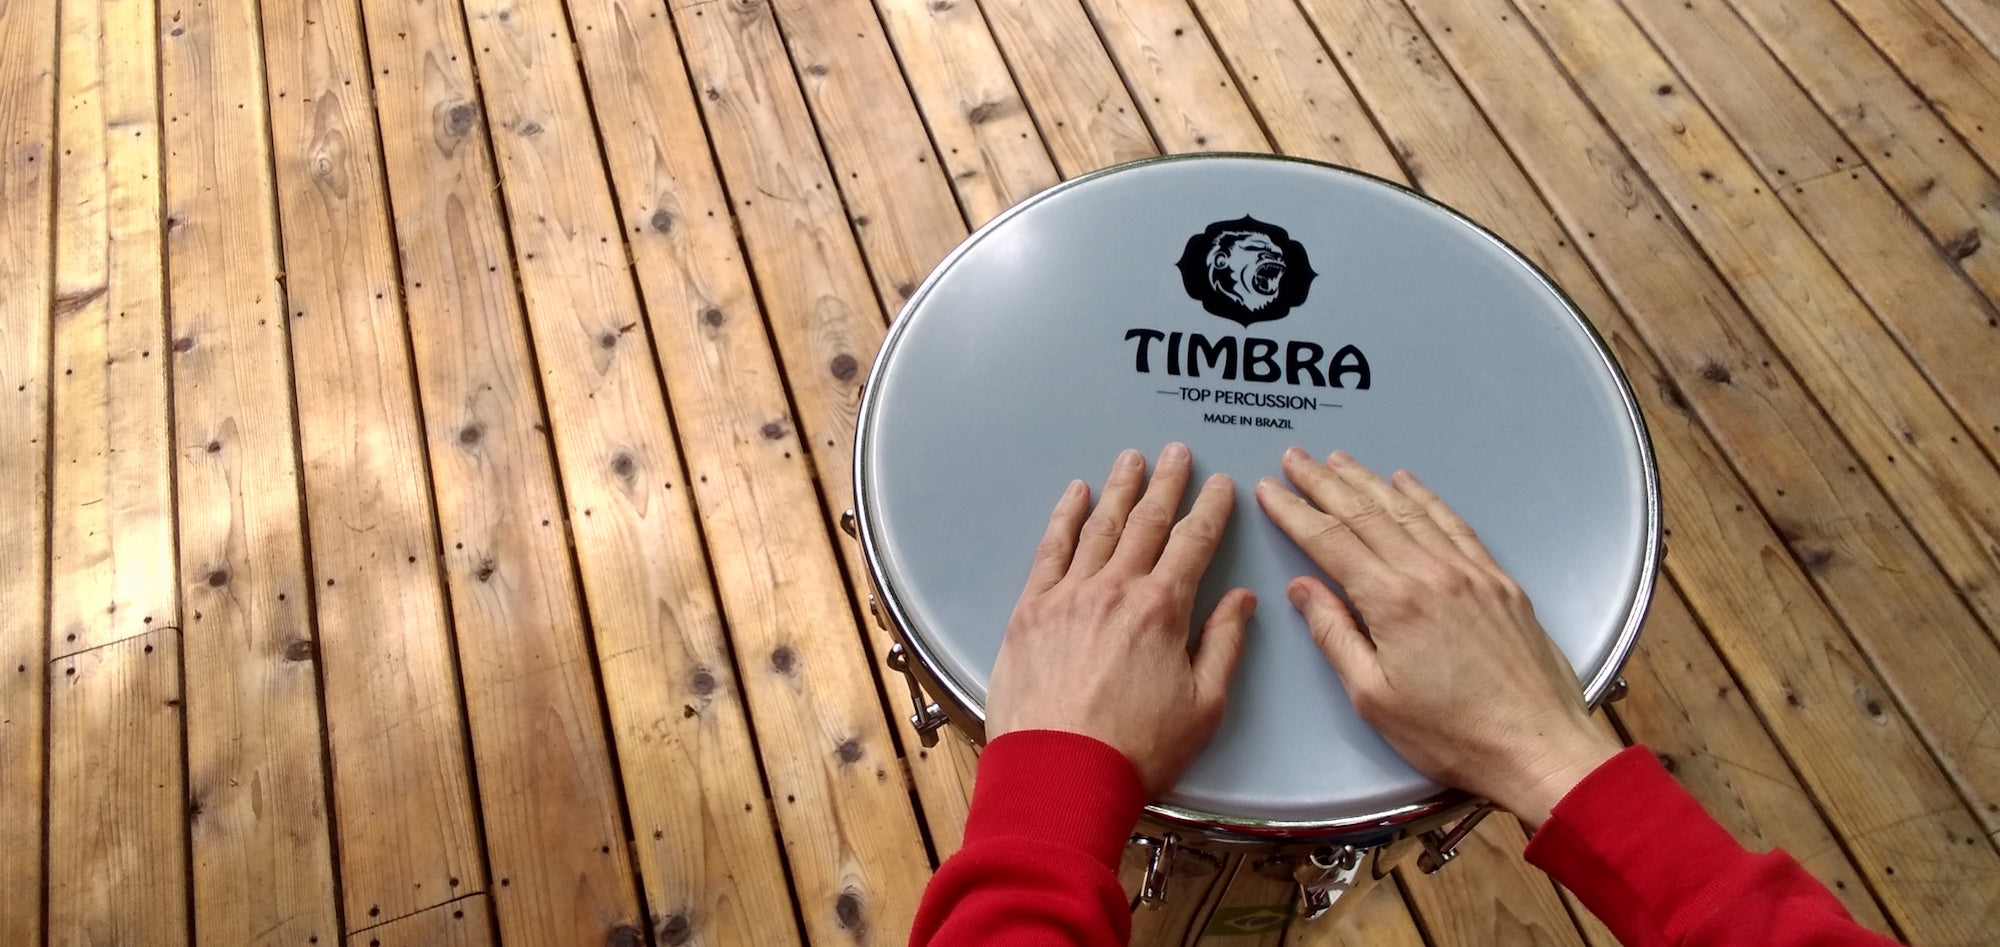 Five tips to warm up your hands before playing drums.